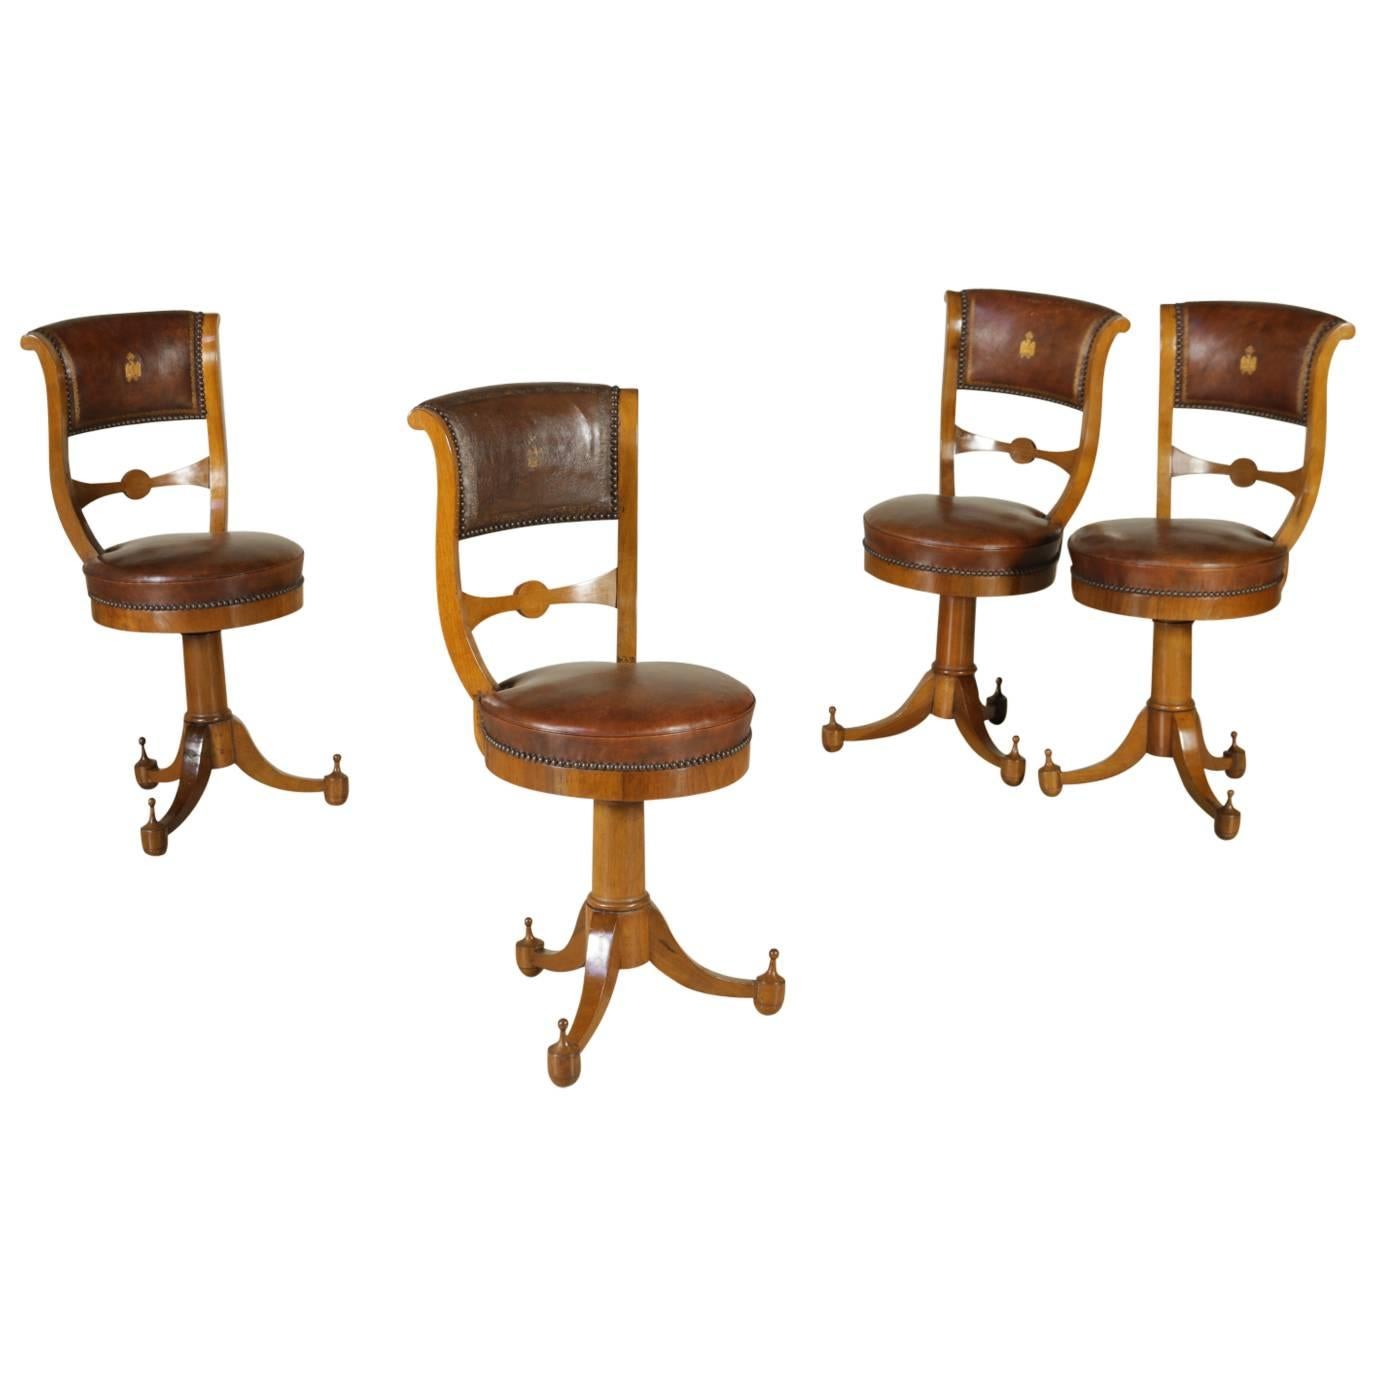 Four Early 19th Century Empire Walnut and Cherry Music Chairs Tuscany, Italy